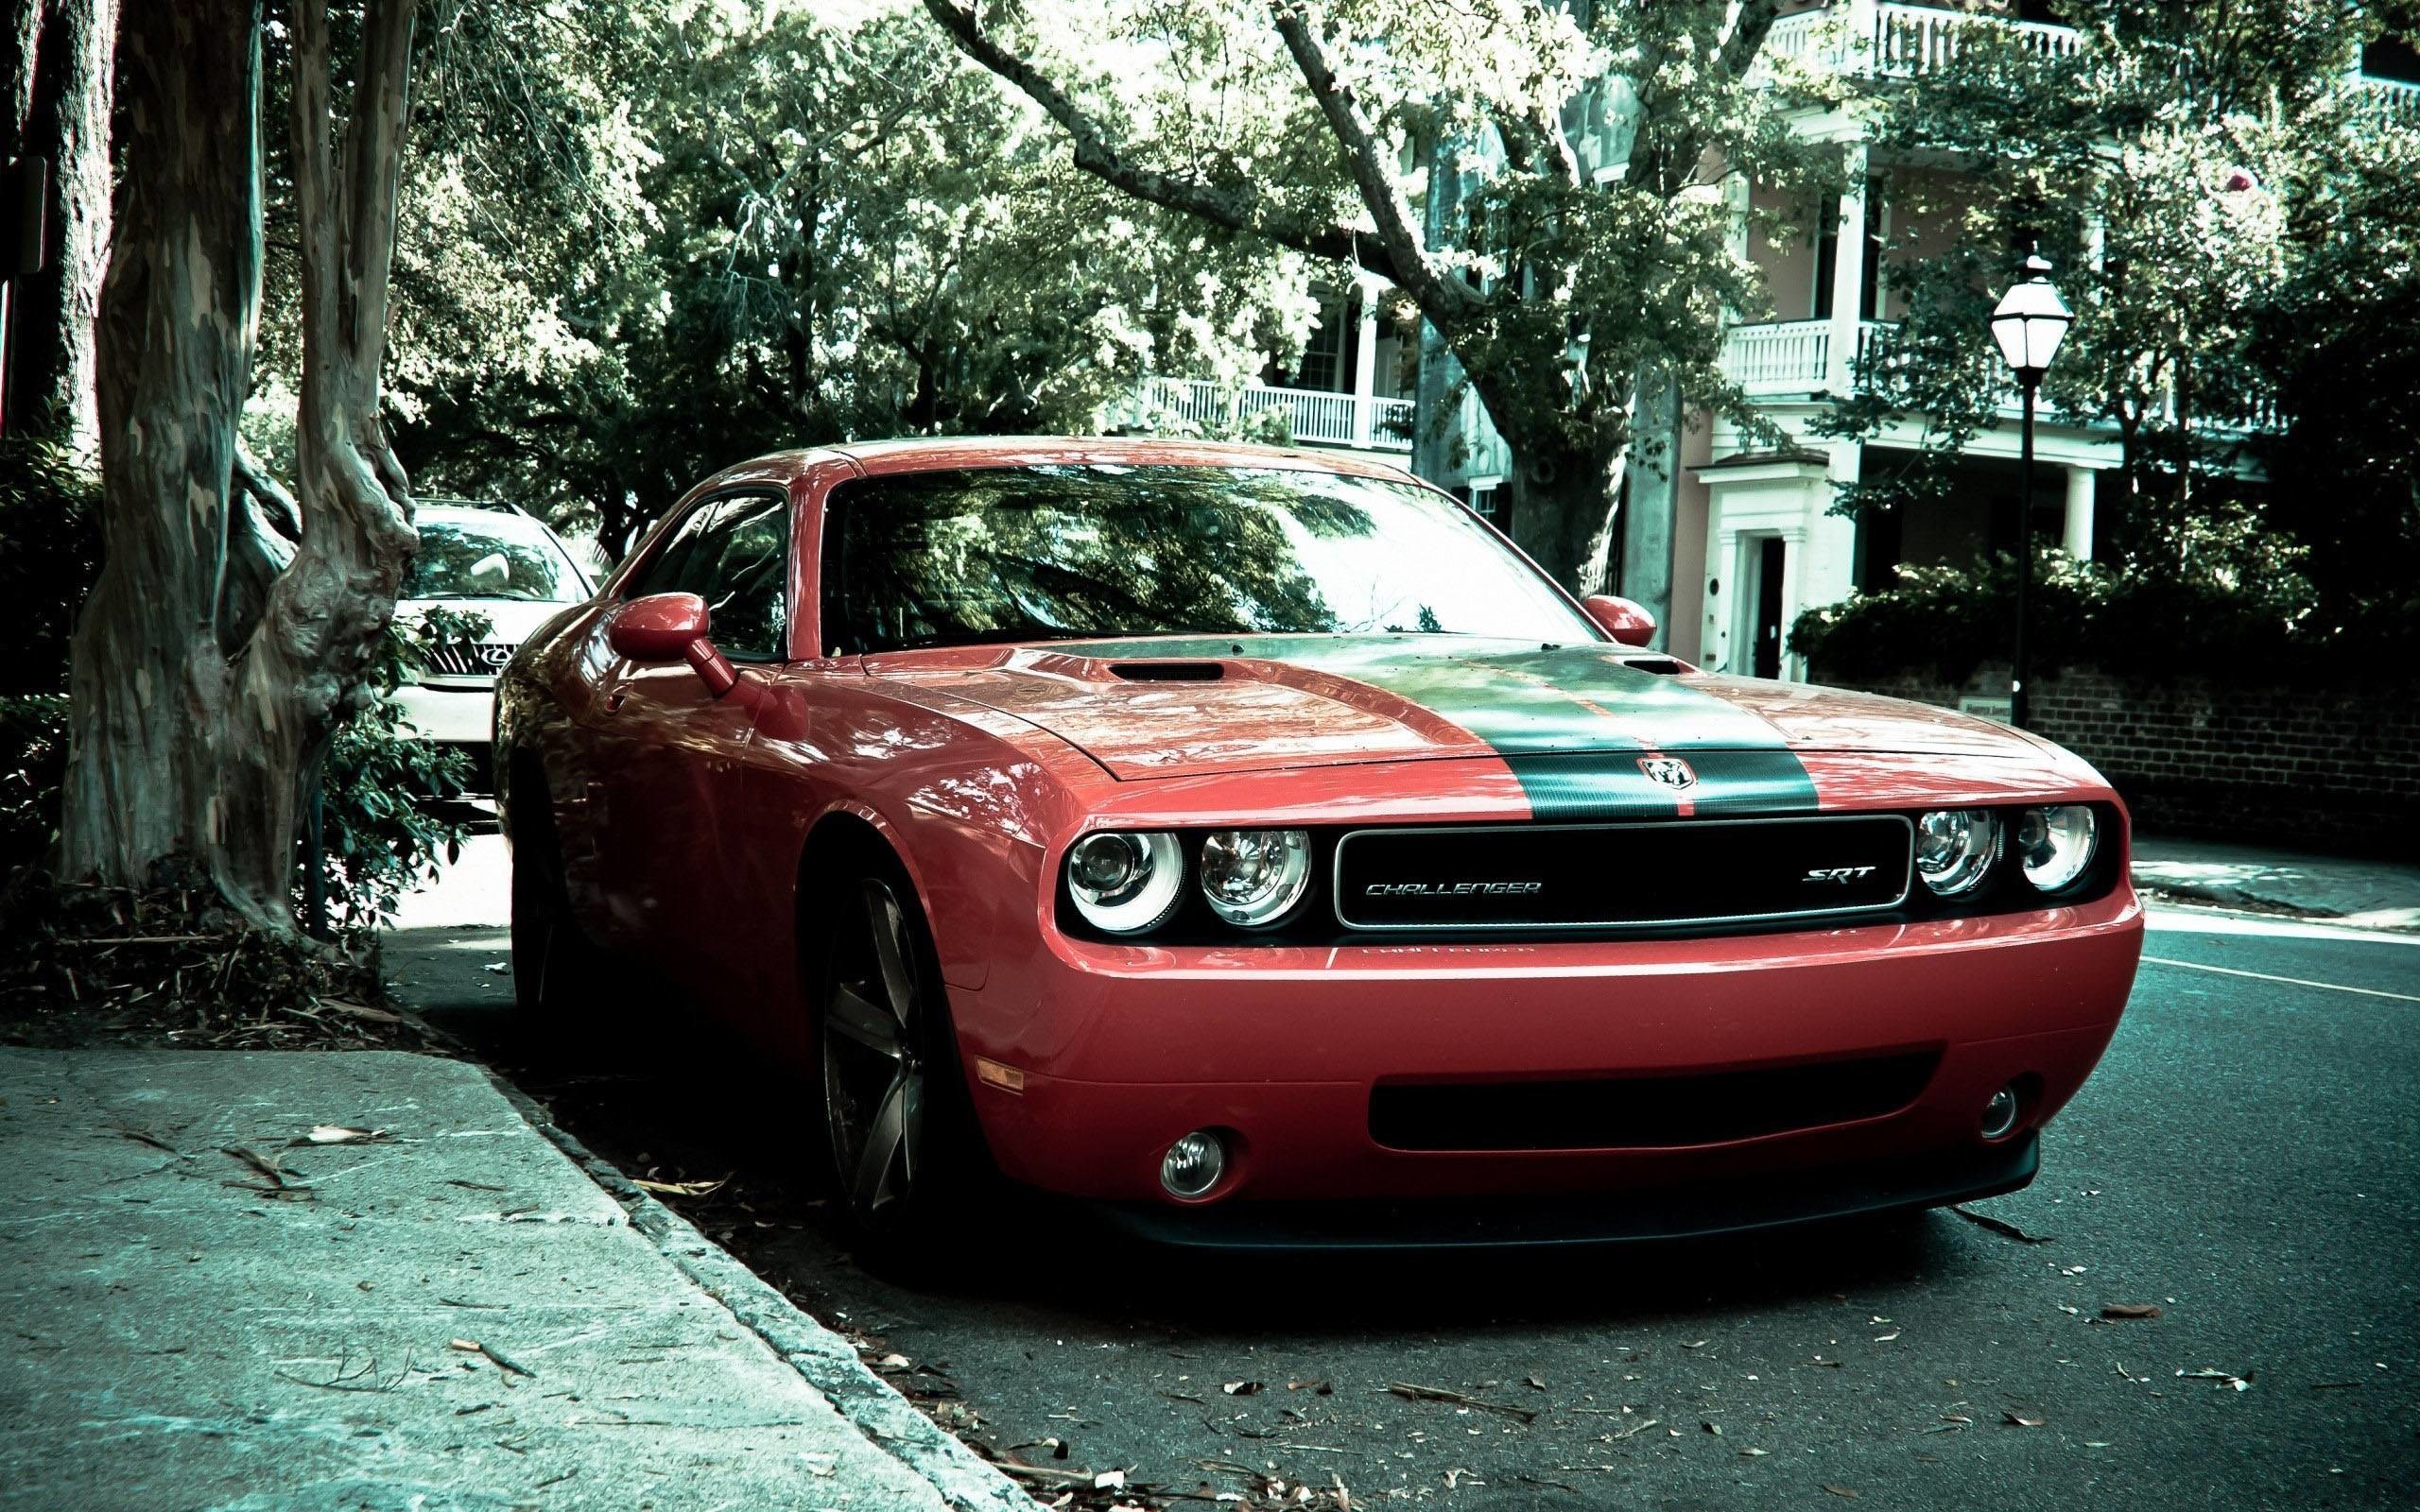 2560x1600 American Muscle Cars Wallpaper 50 with American Muscle Cars Wallpaper